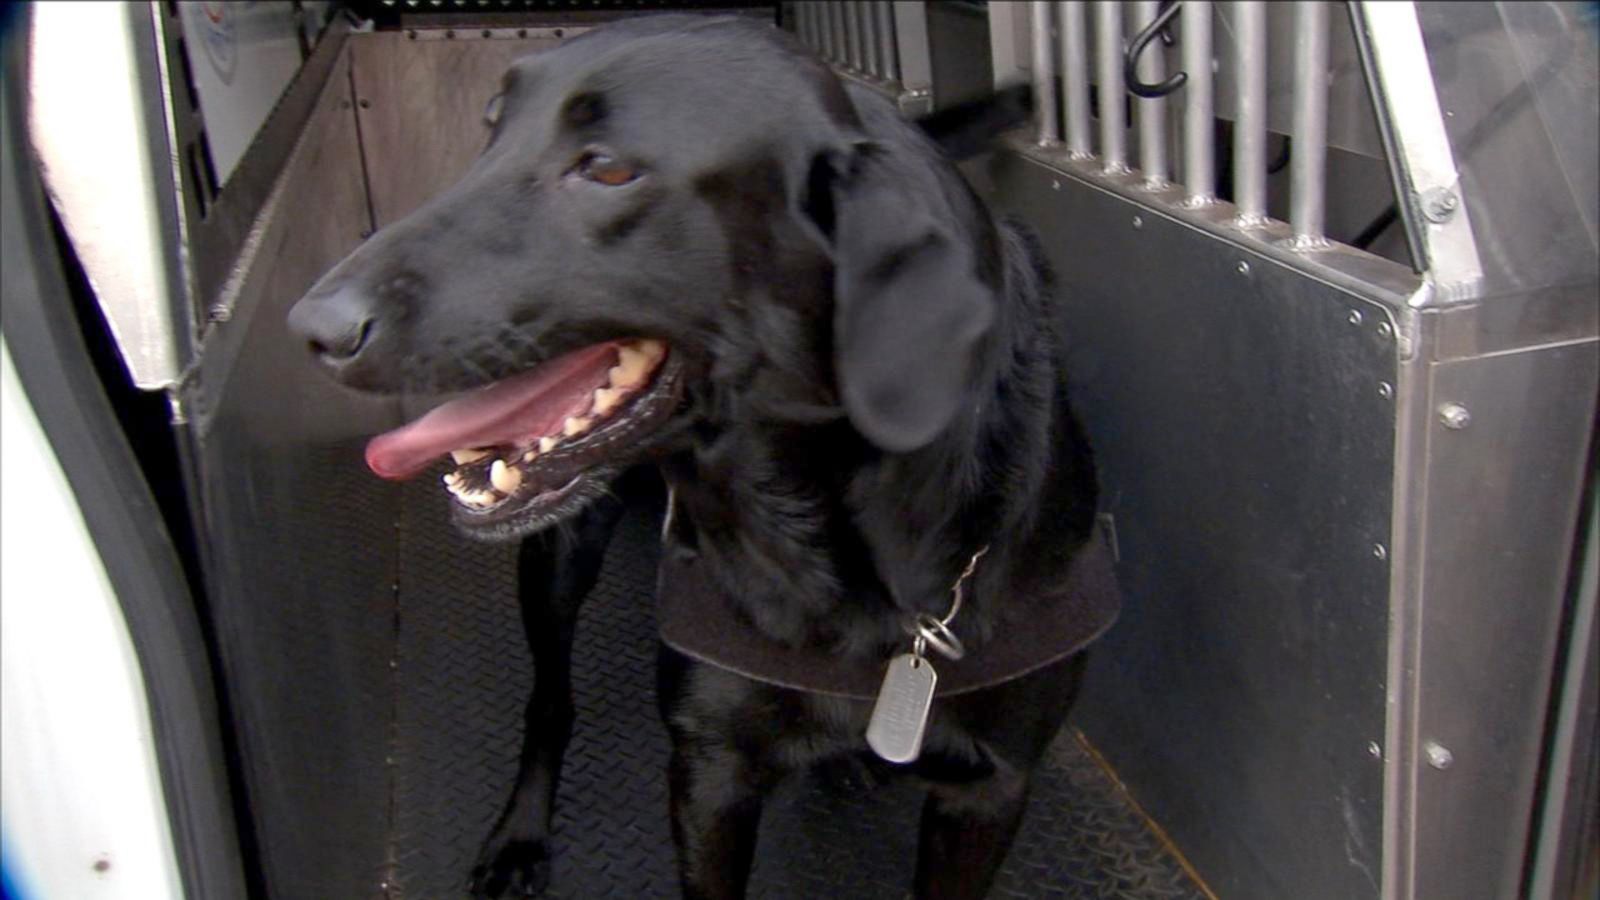 Nashville Predators add explosive-sniffing dogs to security measures